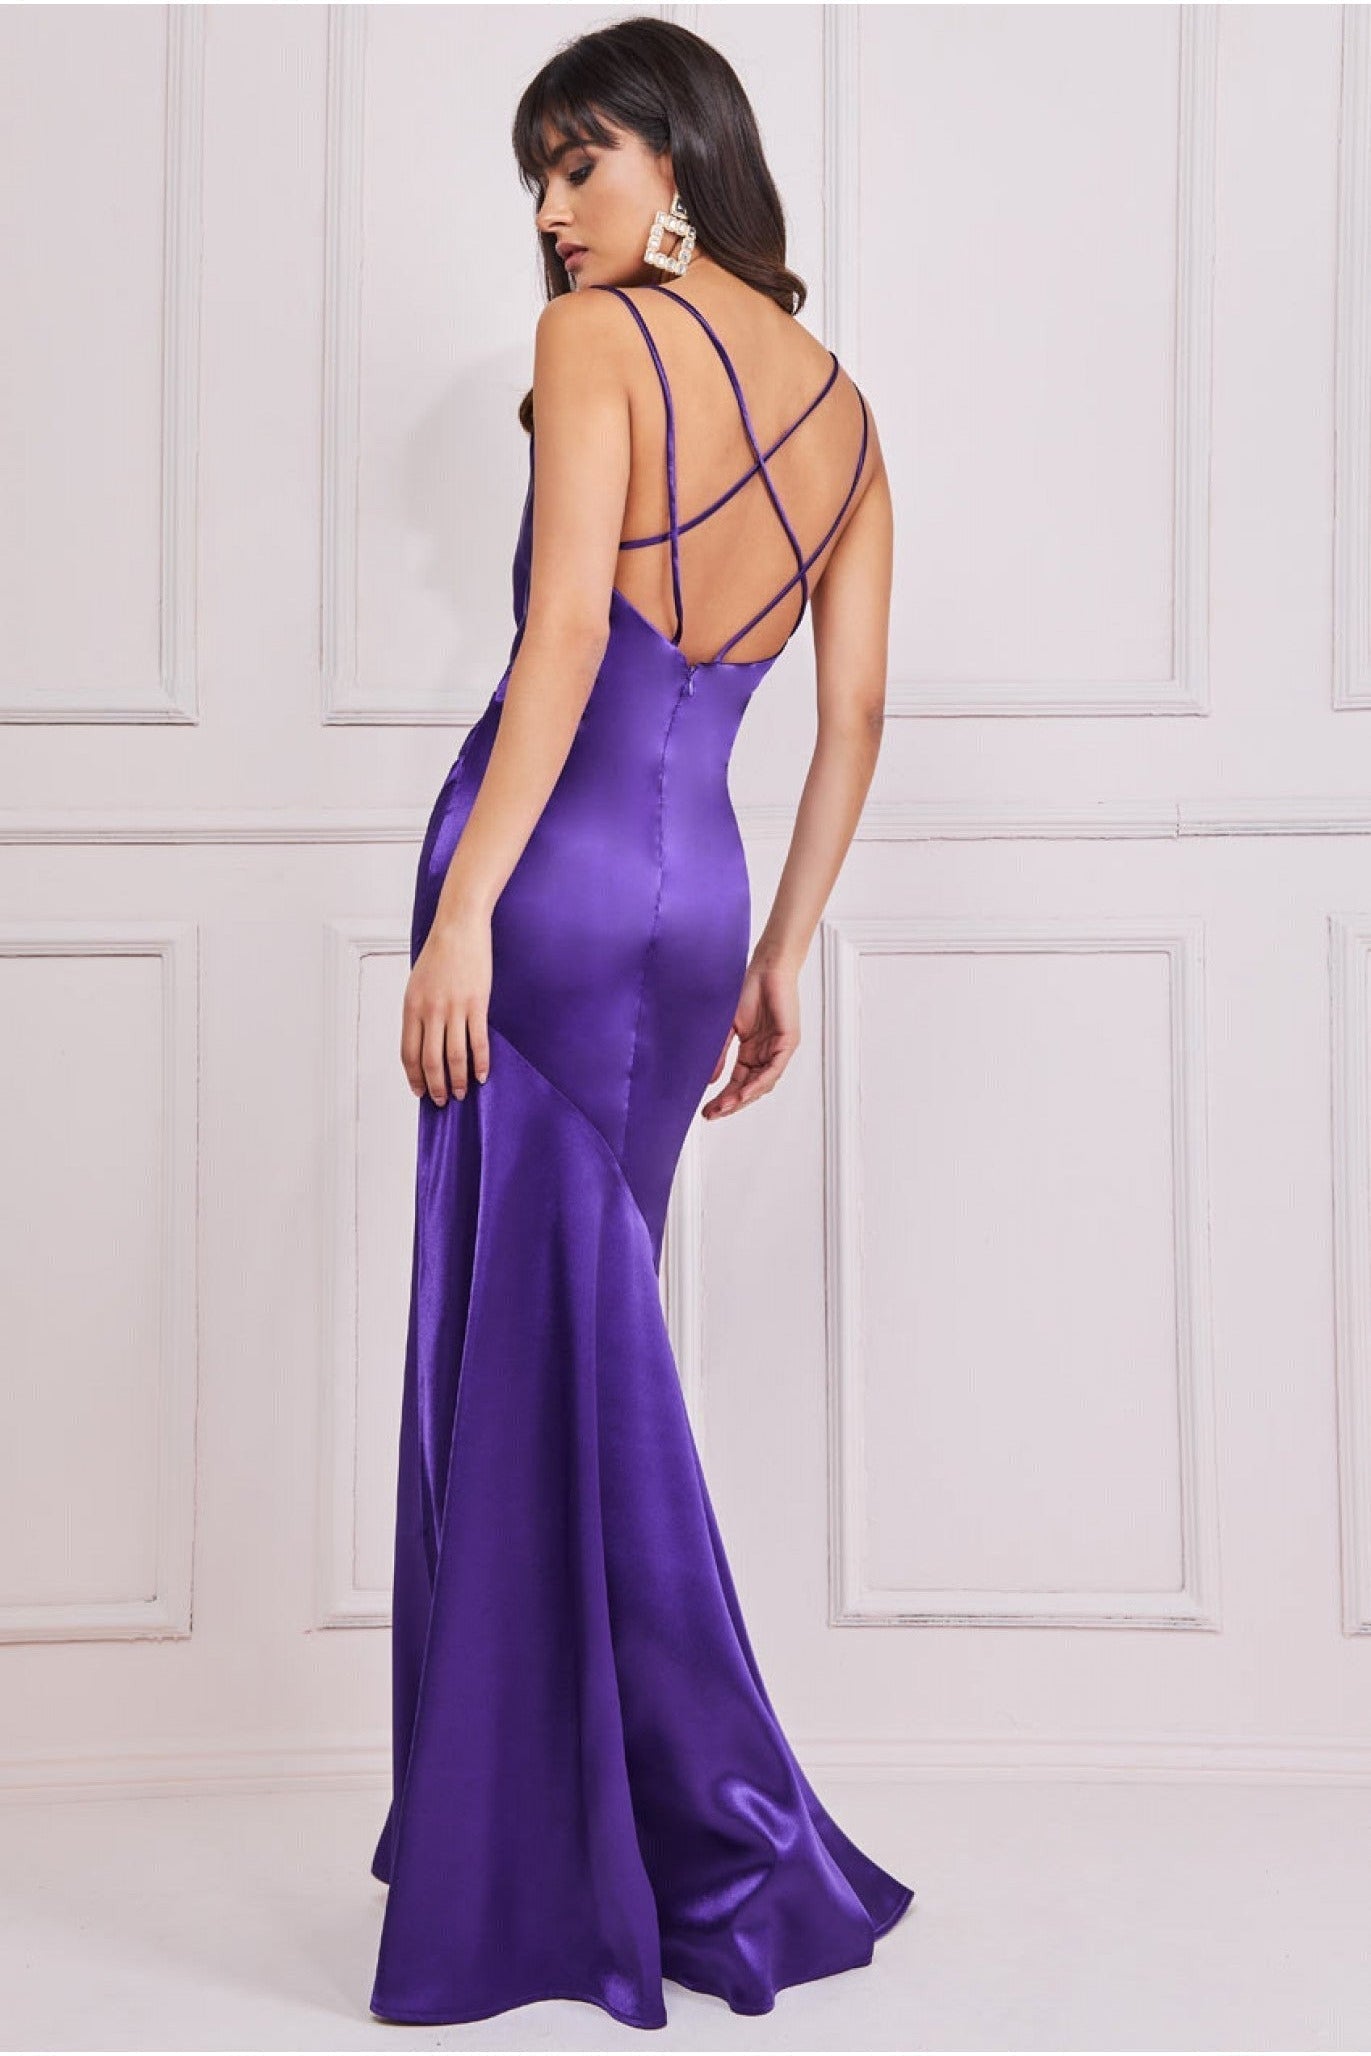 Cowl Neck With Strappy Back Satin Maxi - Purple DR2113